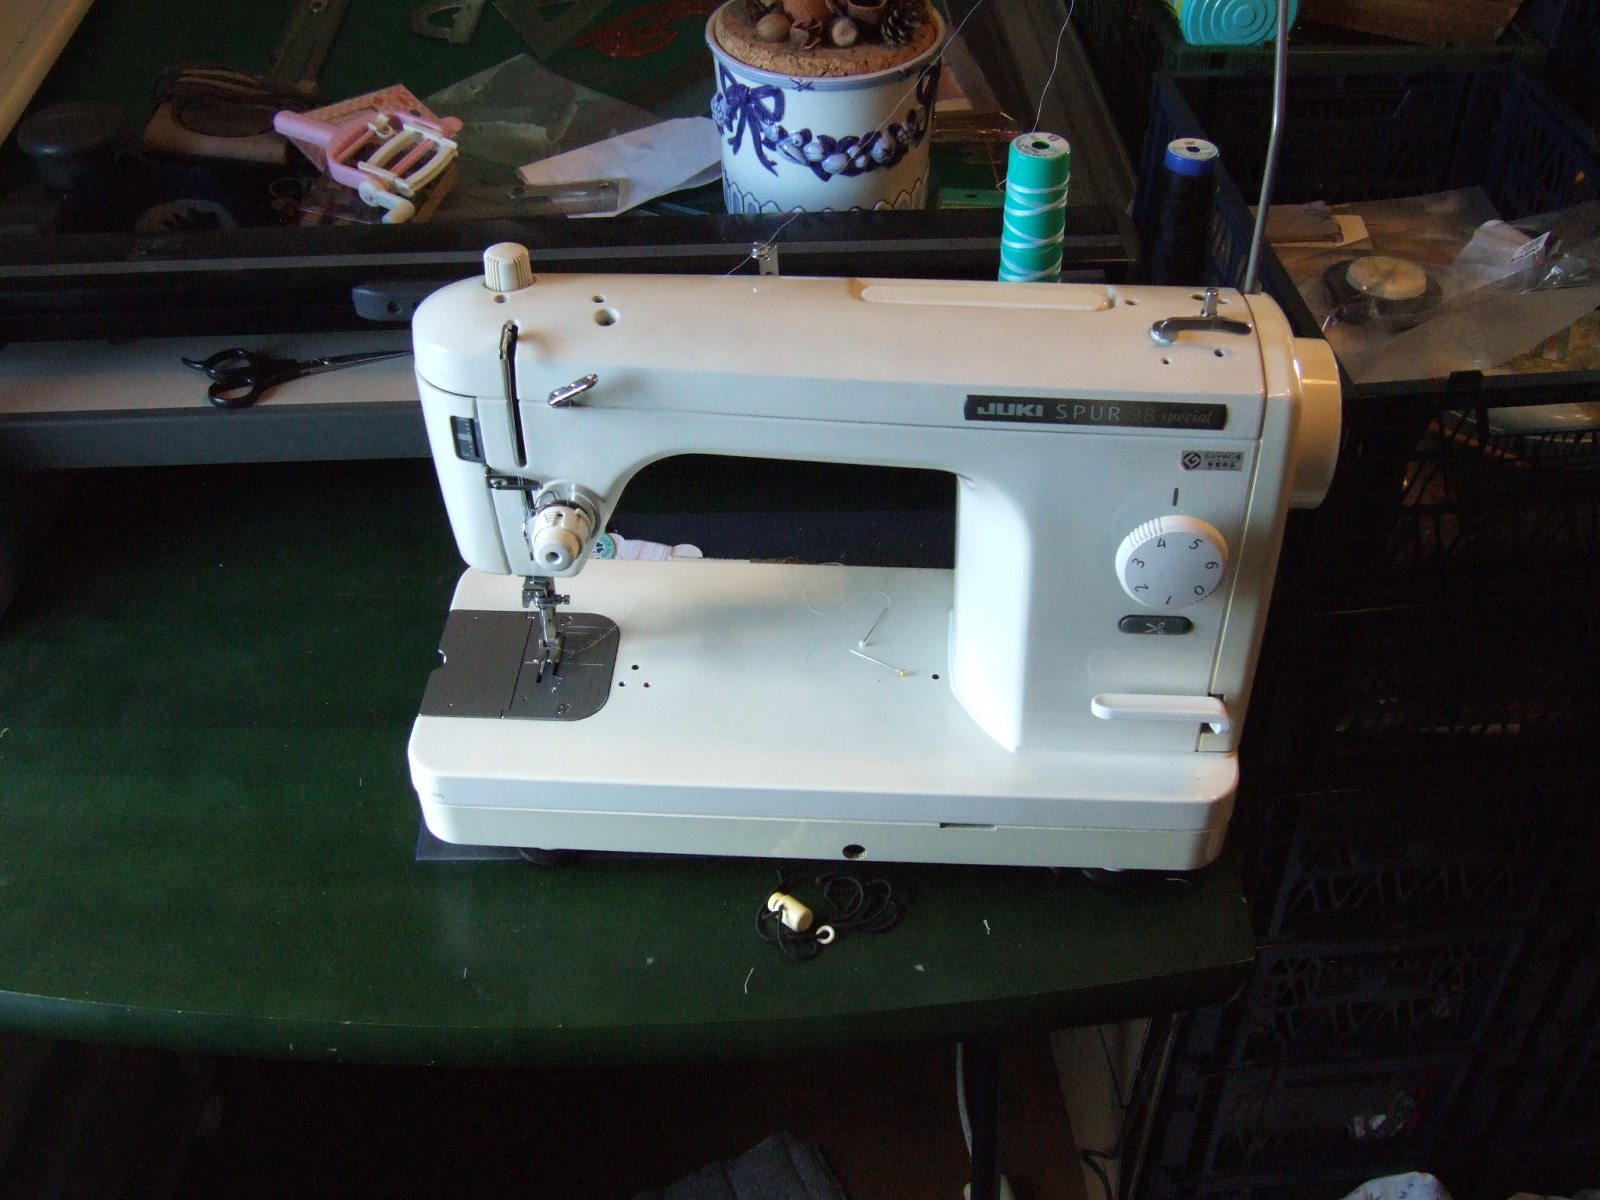 A Juki Spur 98 sewing machine set up to draw from a dwindling spool of white thread